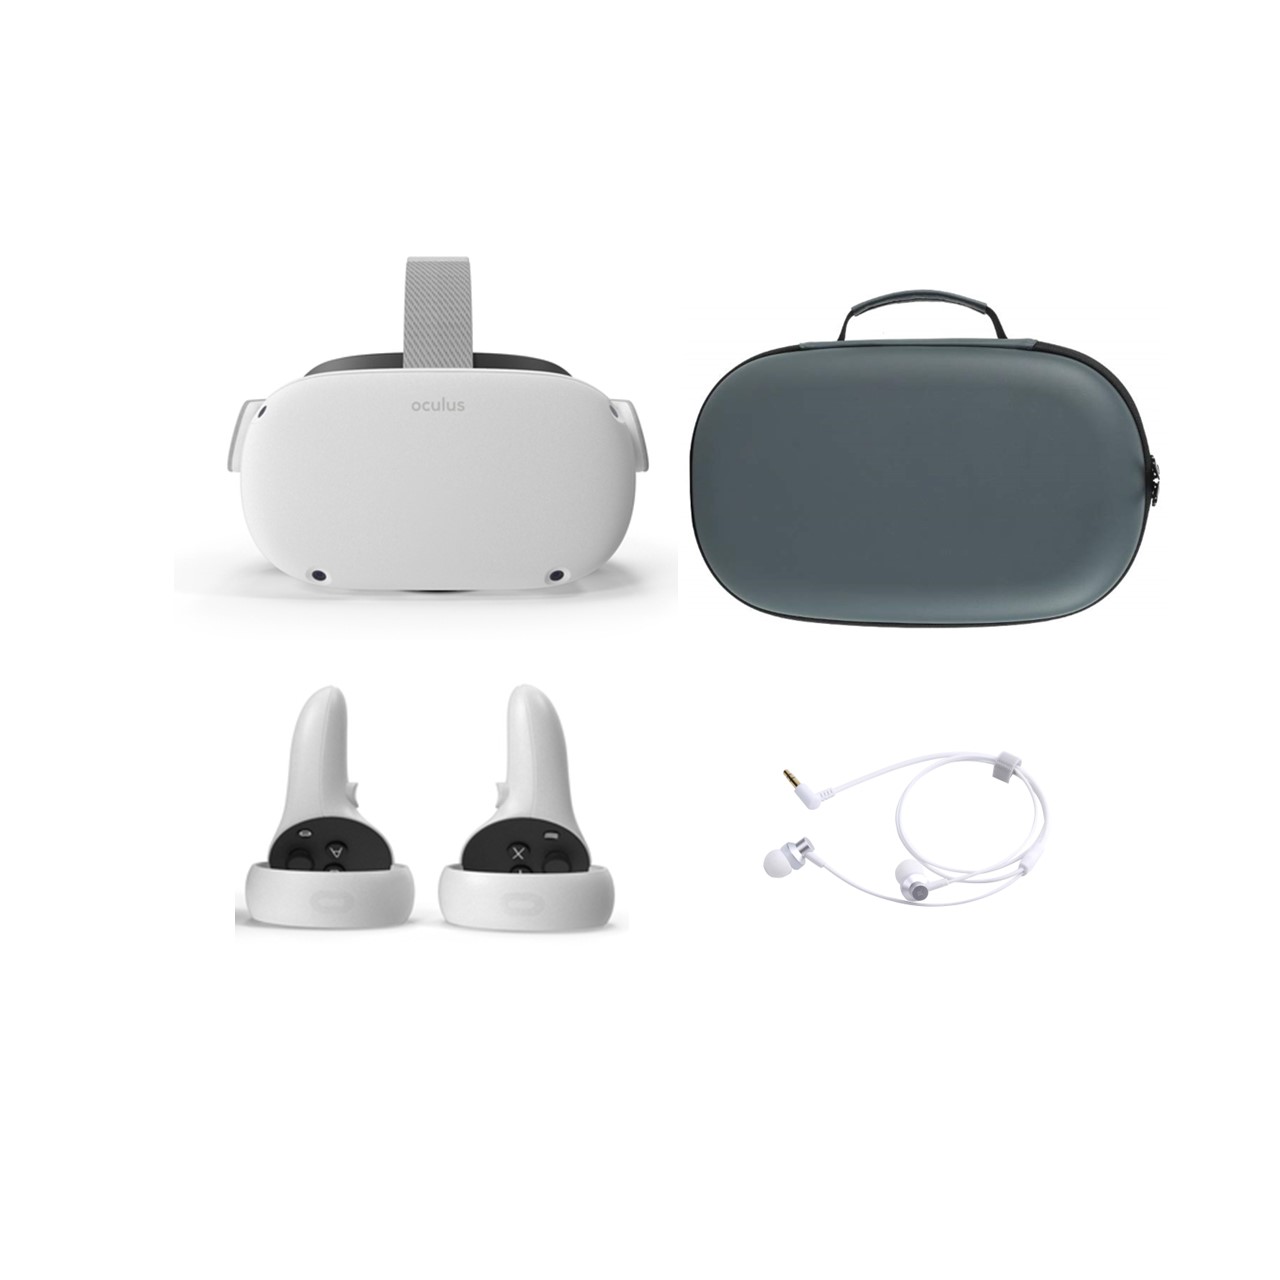 2021 Oculus Quest 2 All-In-One VR Headset, Touch Controllers, 128GB SSD, 1832x1920 up to 90 Hz Refresh Rate LCD, Glasses Compatible, 3D Audio, Mytrix Carrying Case, Earphone - image 1 of 7